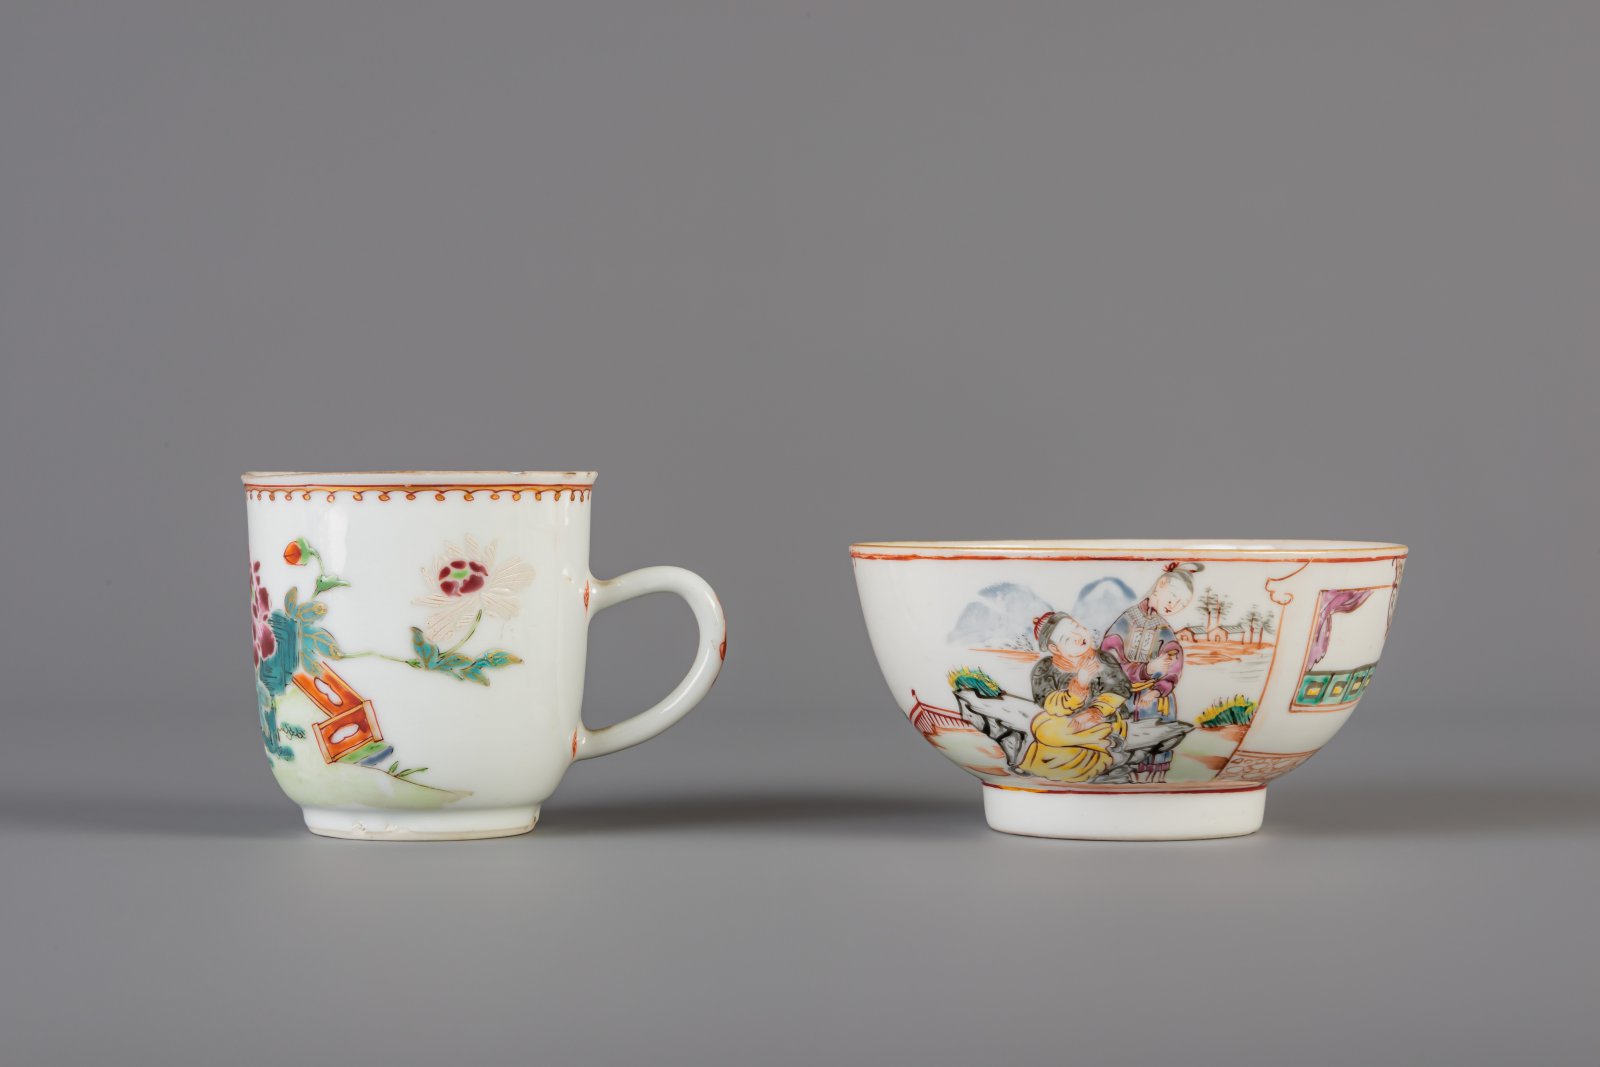 A varied collection of Chinese porcelain, 18th/19th C. - Image 10 of 13